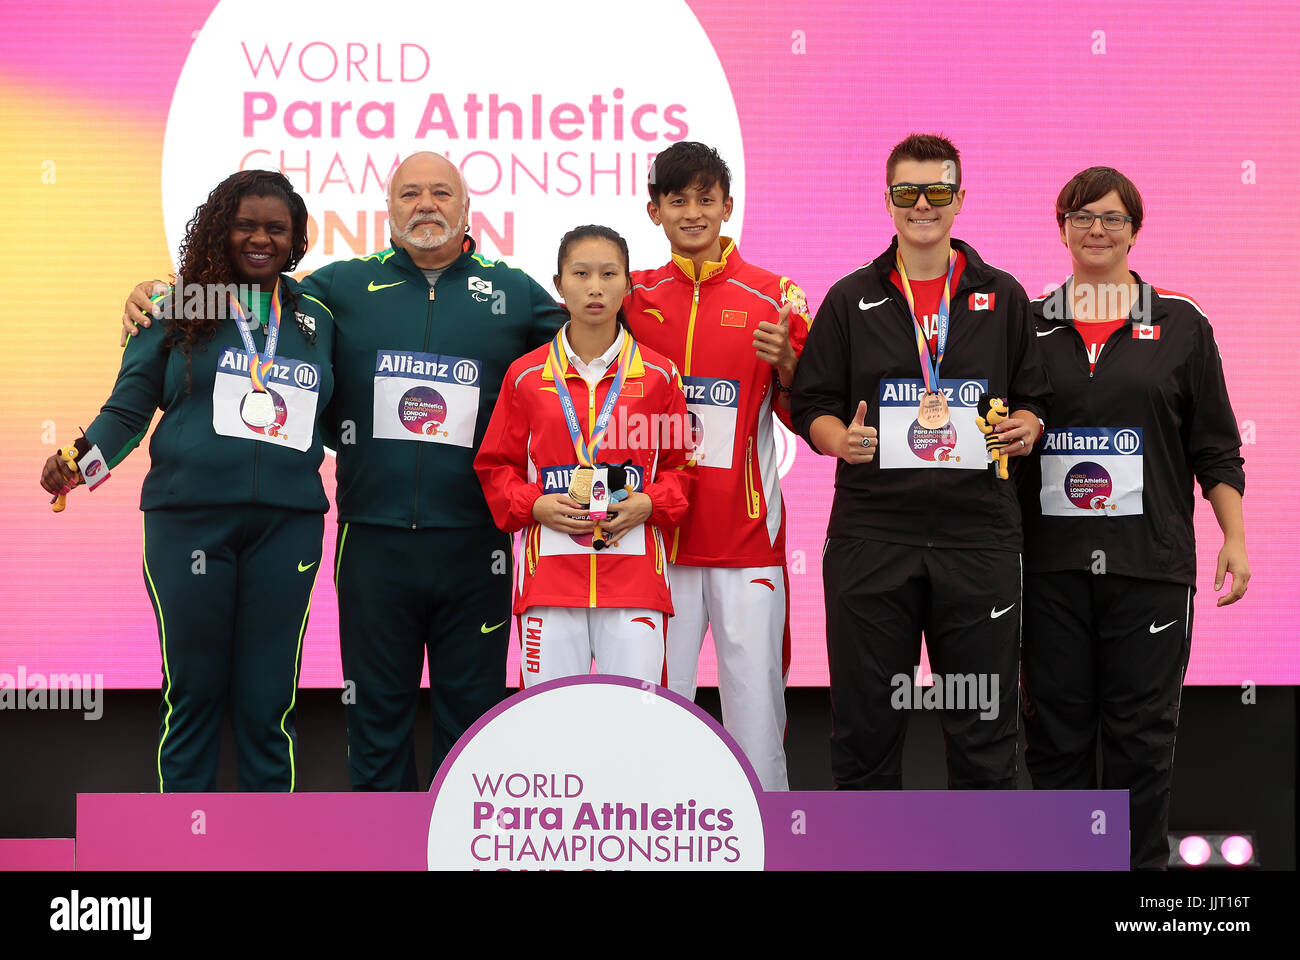 China's Huimin Zhong (centre), Brazil's Izabela Campos (left) and Canada's Ness Murby with their medals after the Women's Javelin Throw F11 Final after the Women's Javelin F11 during day five of the 2017 World Para Athletics Championships at London Stadium Stock Photo